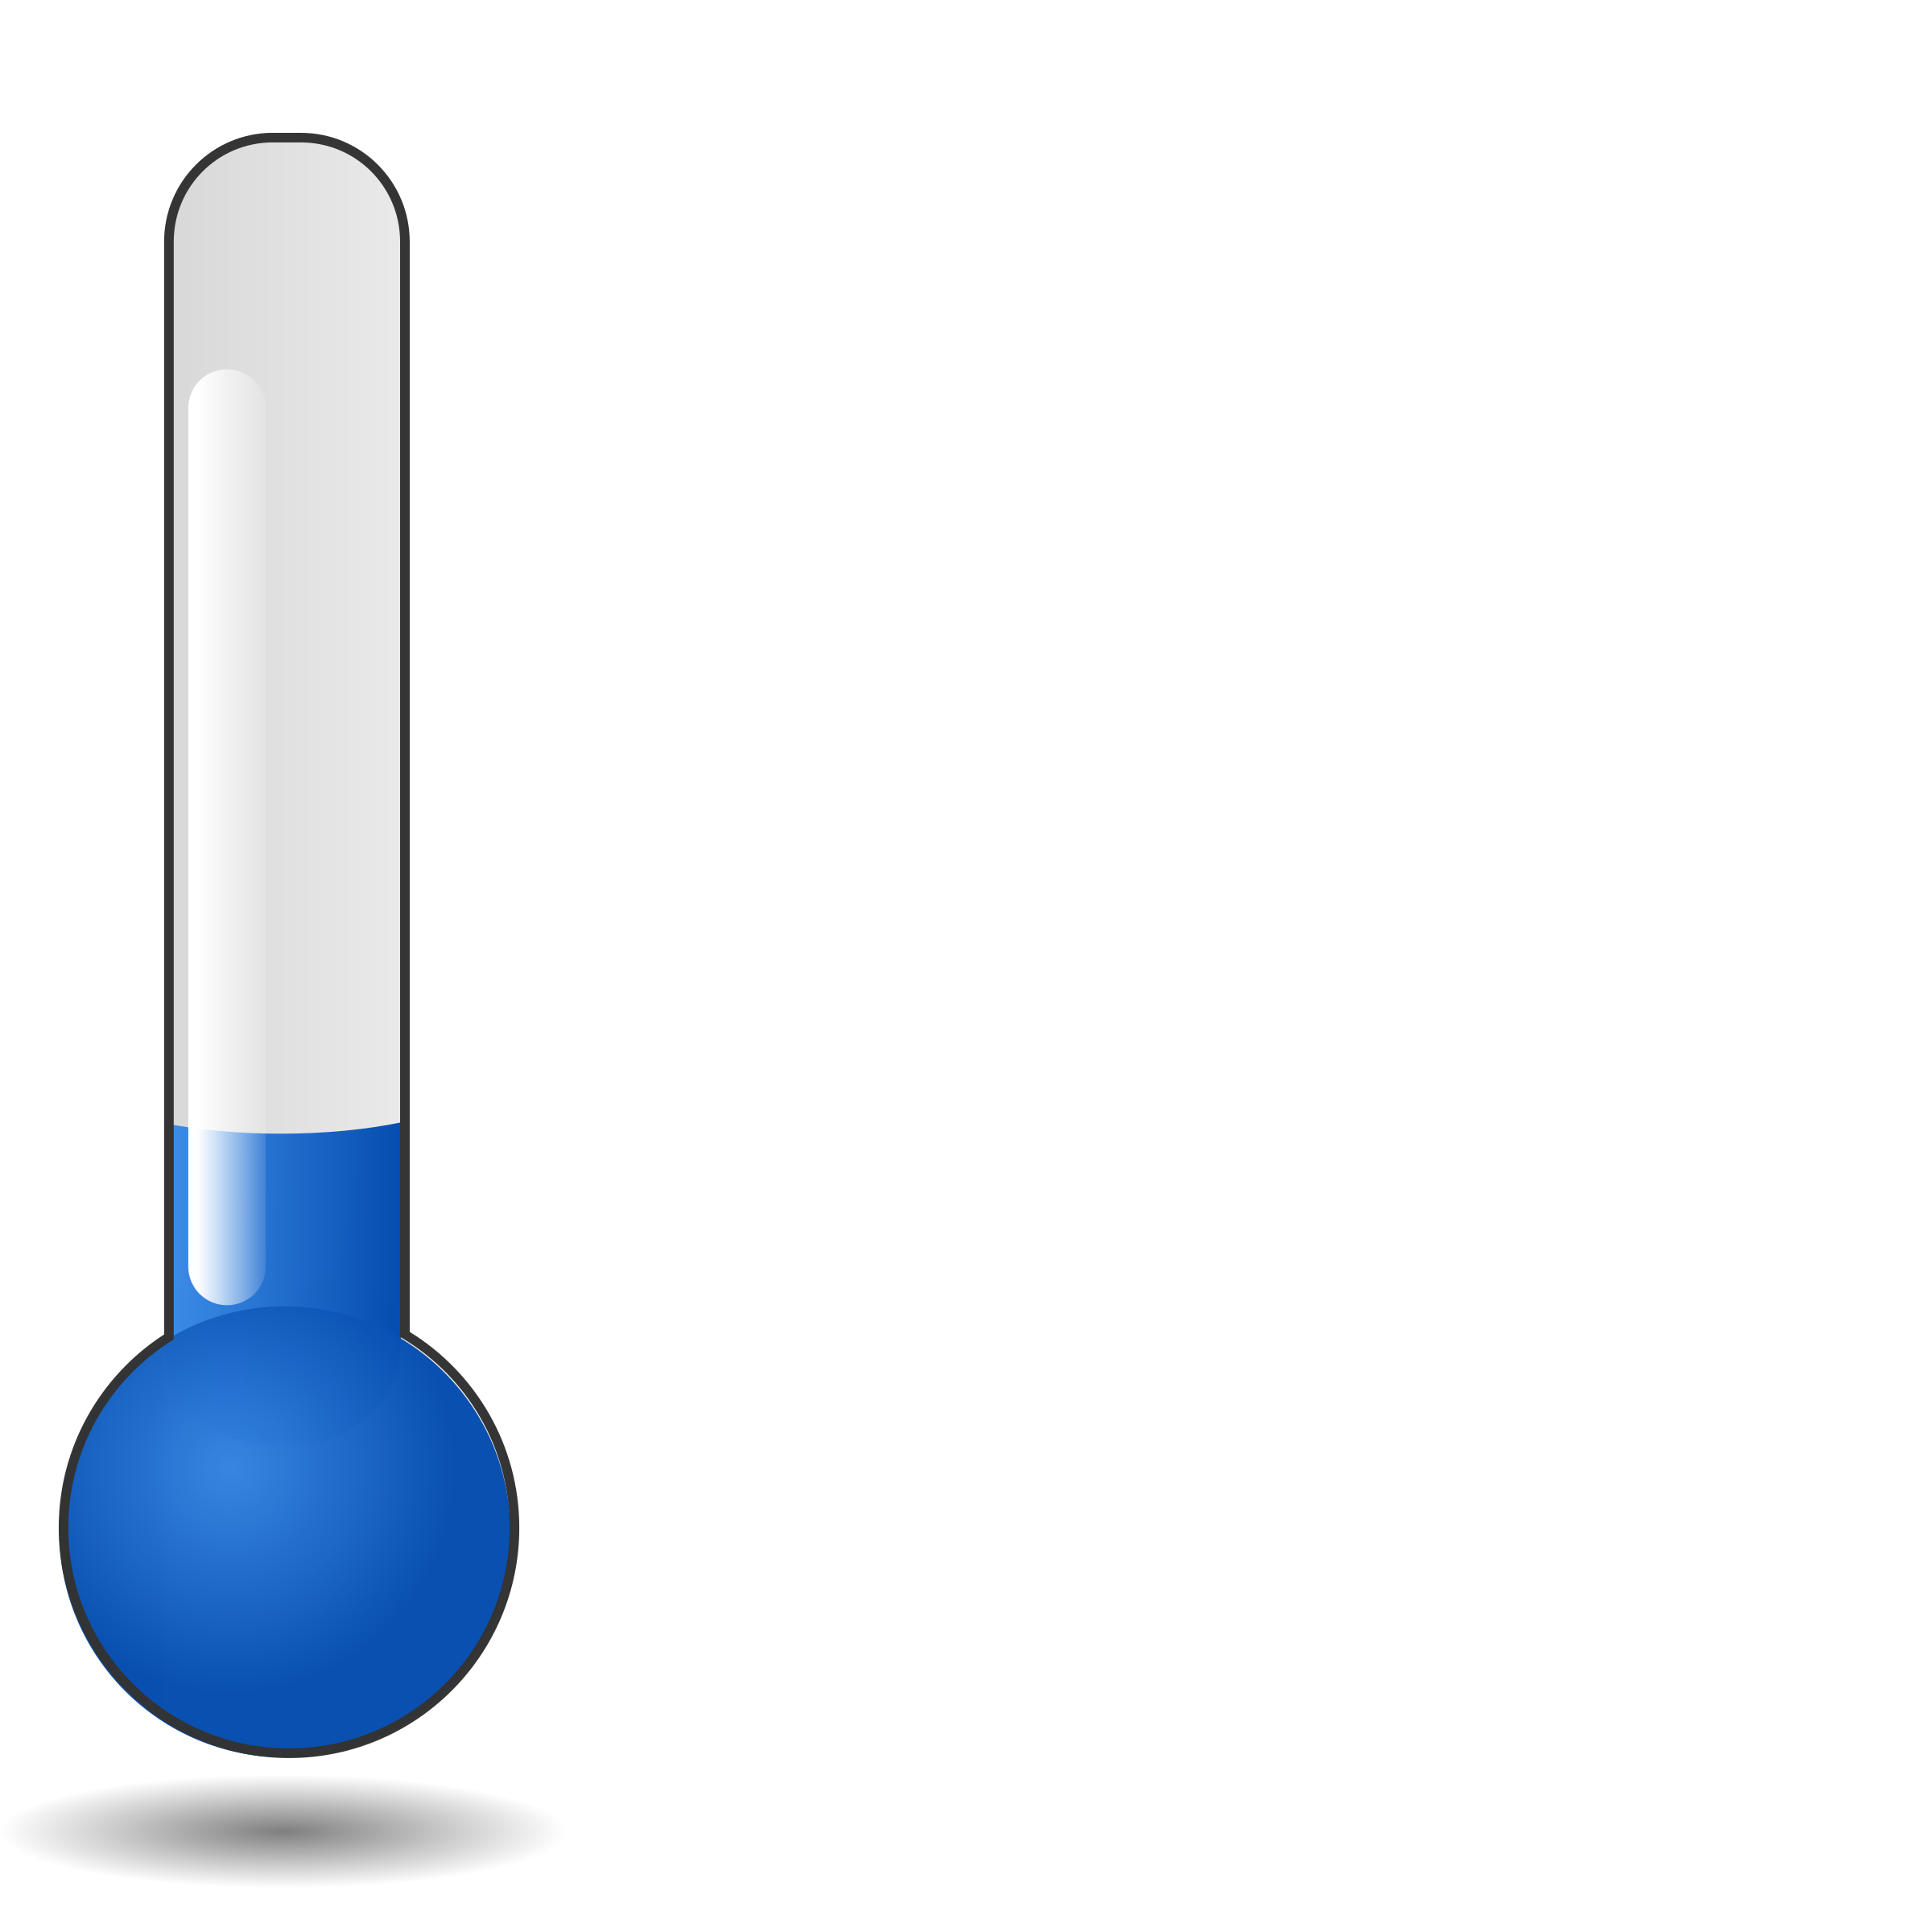 Cold clipart thermometer. Quotes about temperature helpful